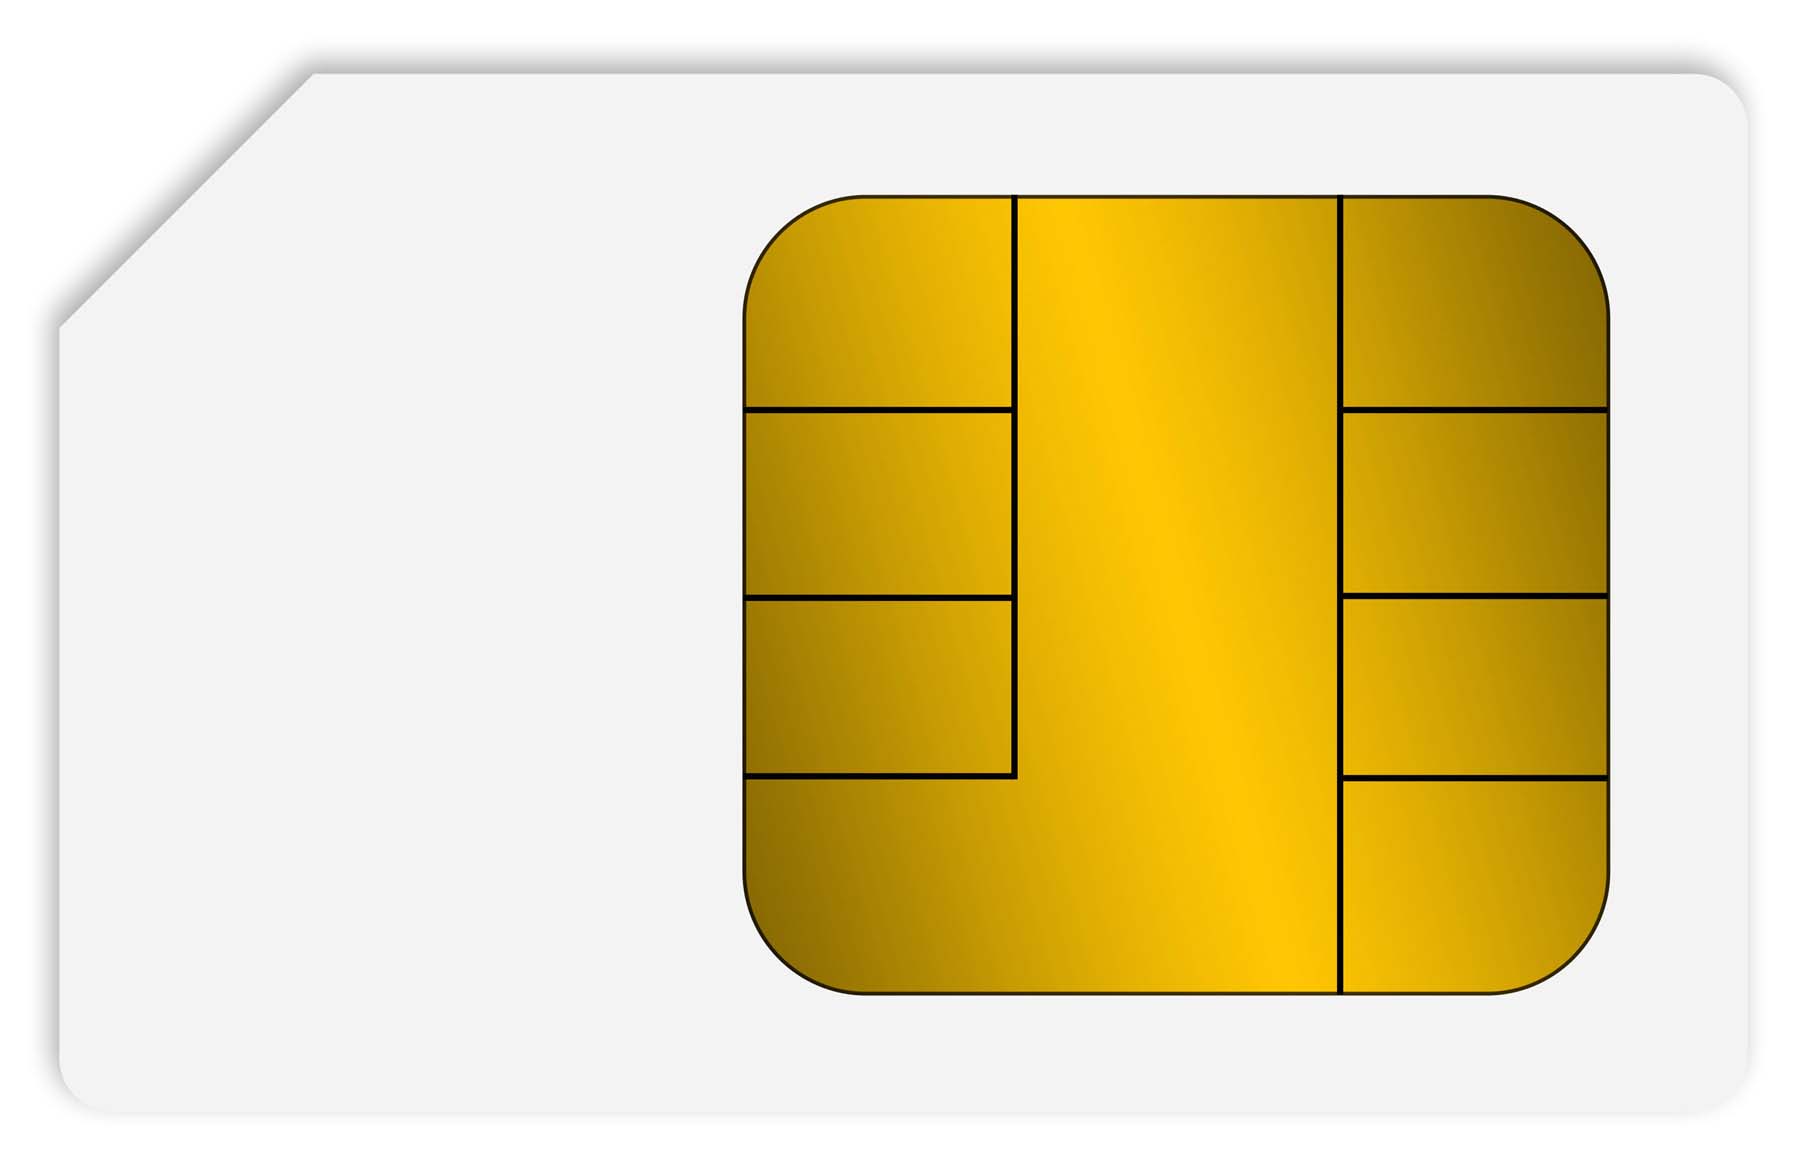 SIM card for LTE CATM1, NB IoT, 4G, 3G, 2G GSM shields